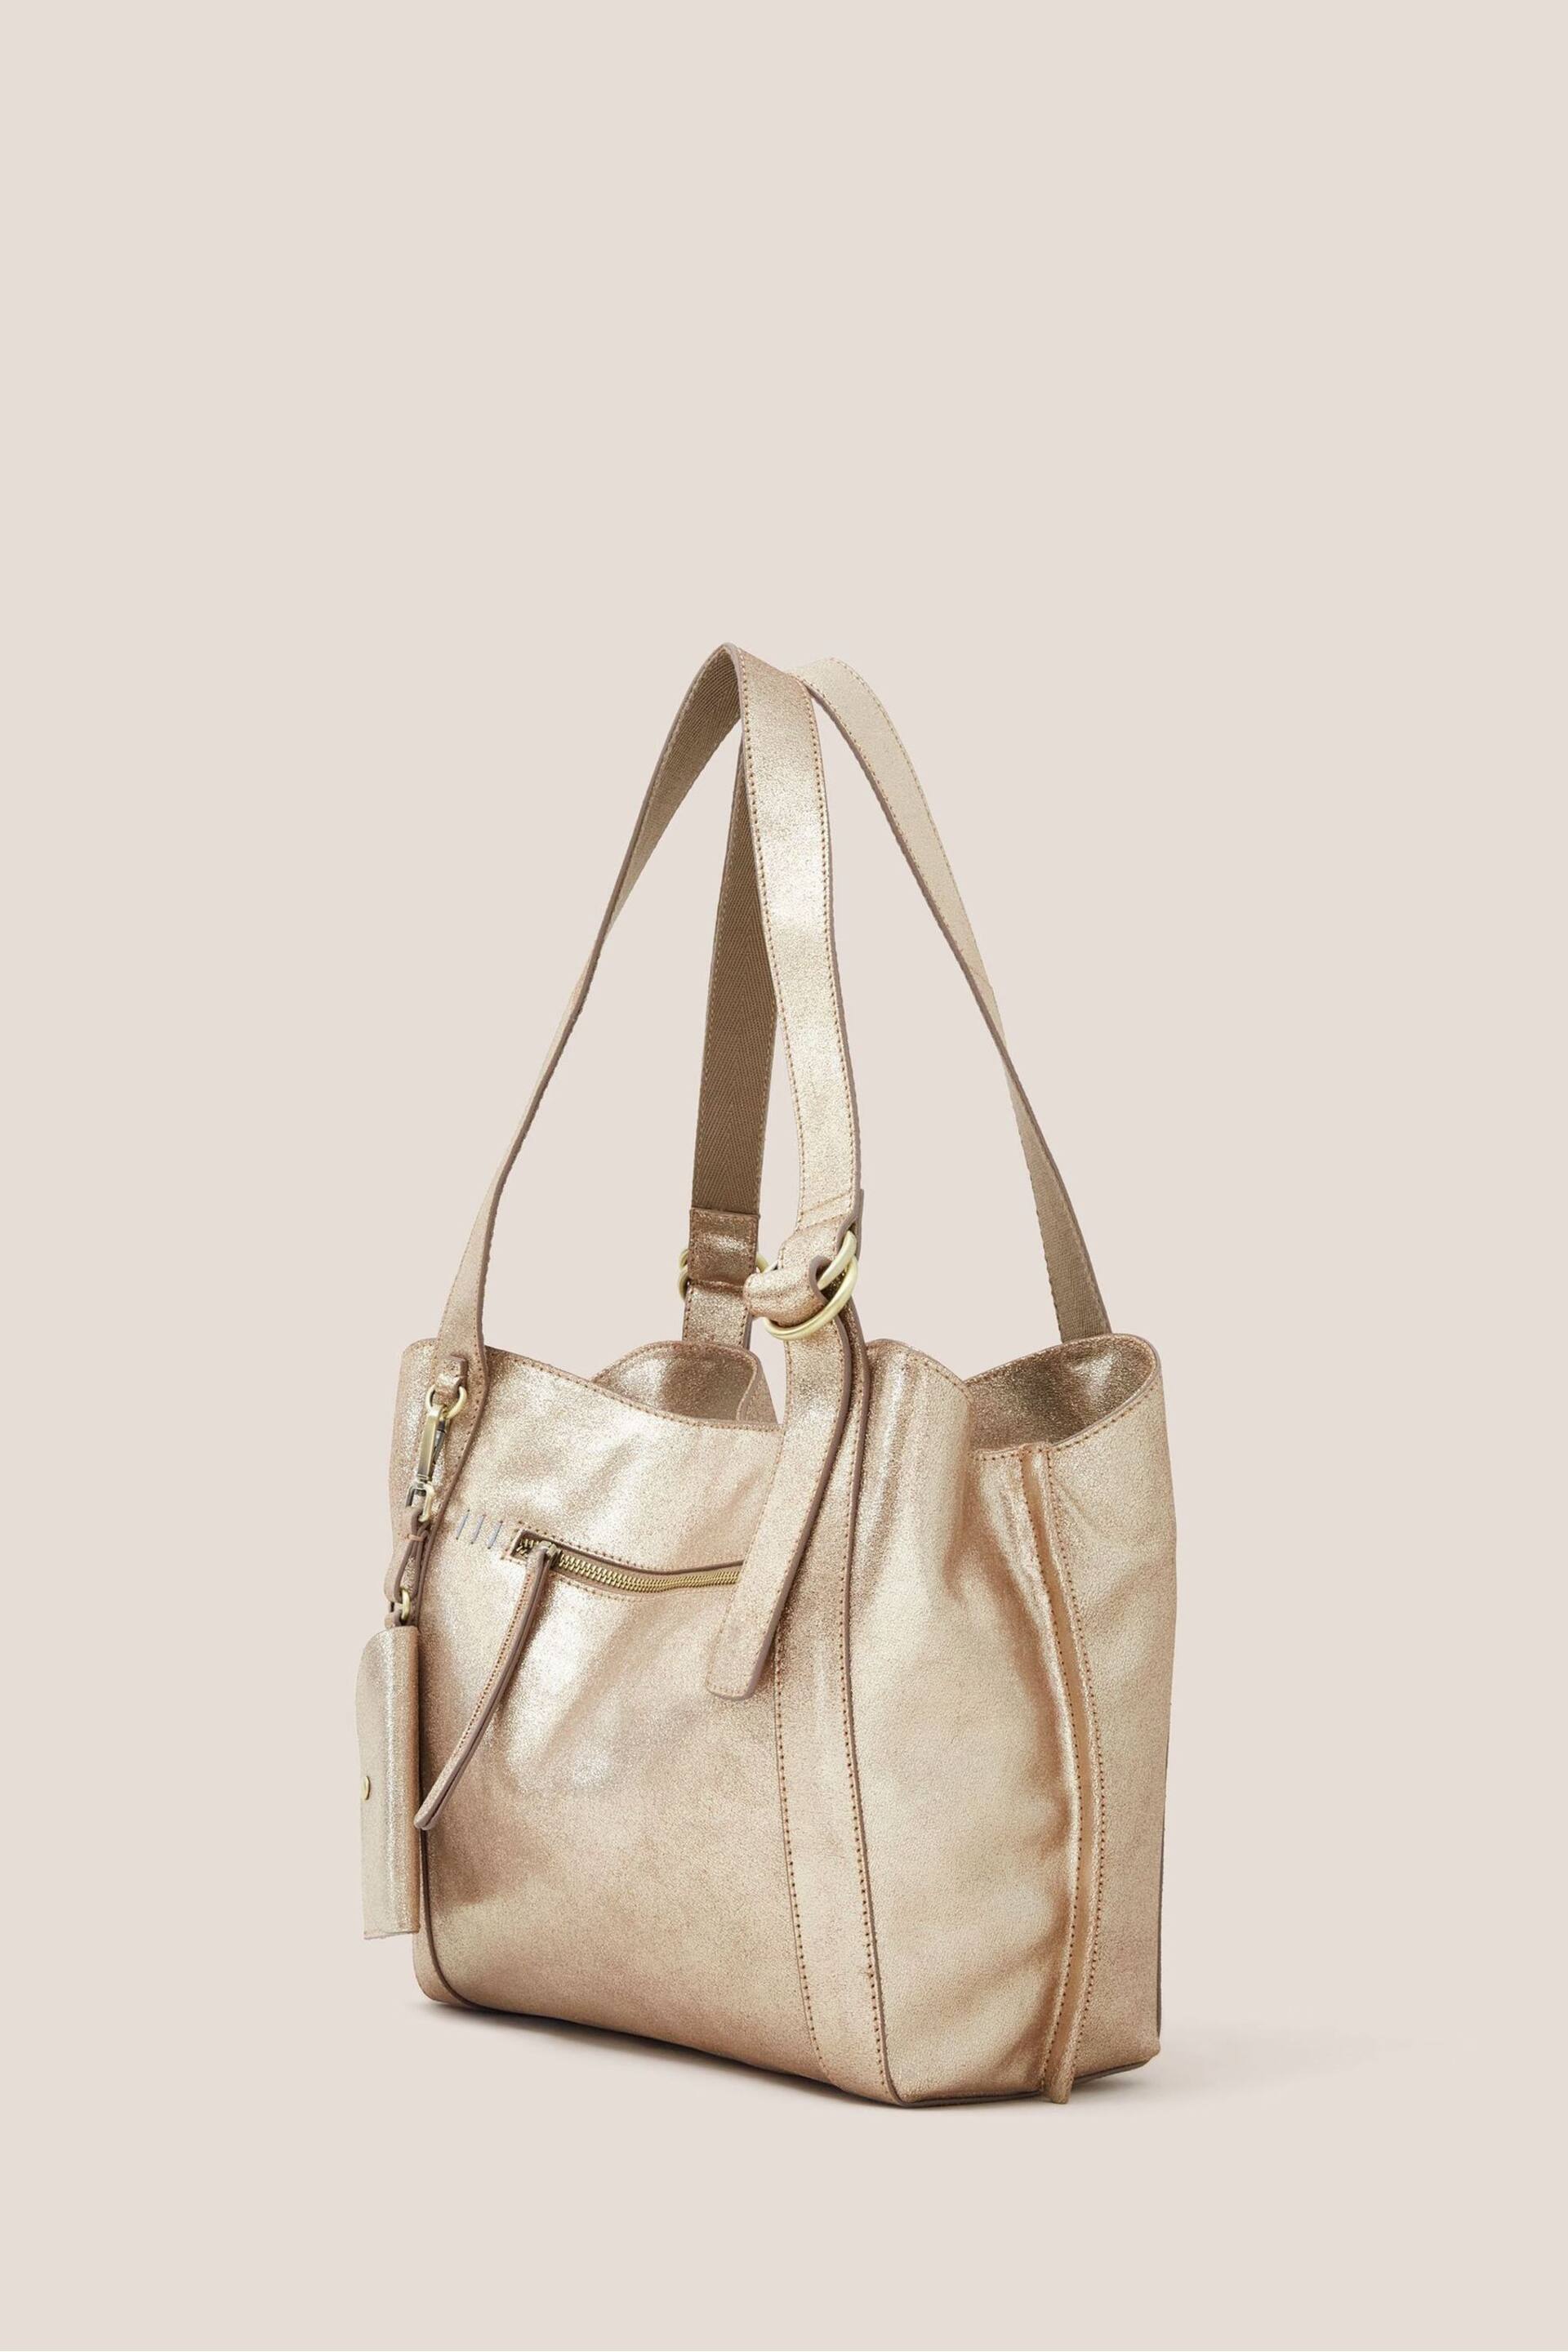 White Stuff Gold Hannah Leather Bag - Image 2 of 4